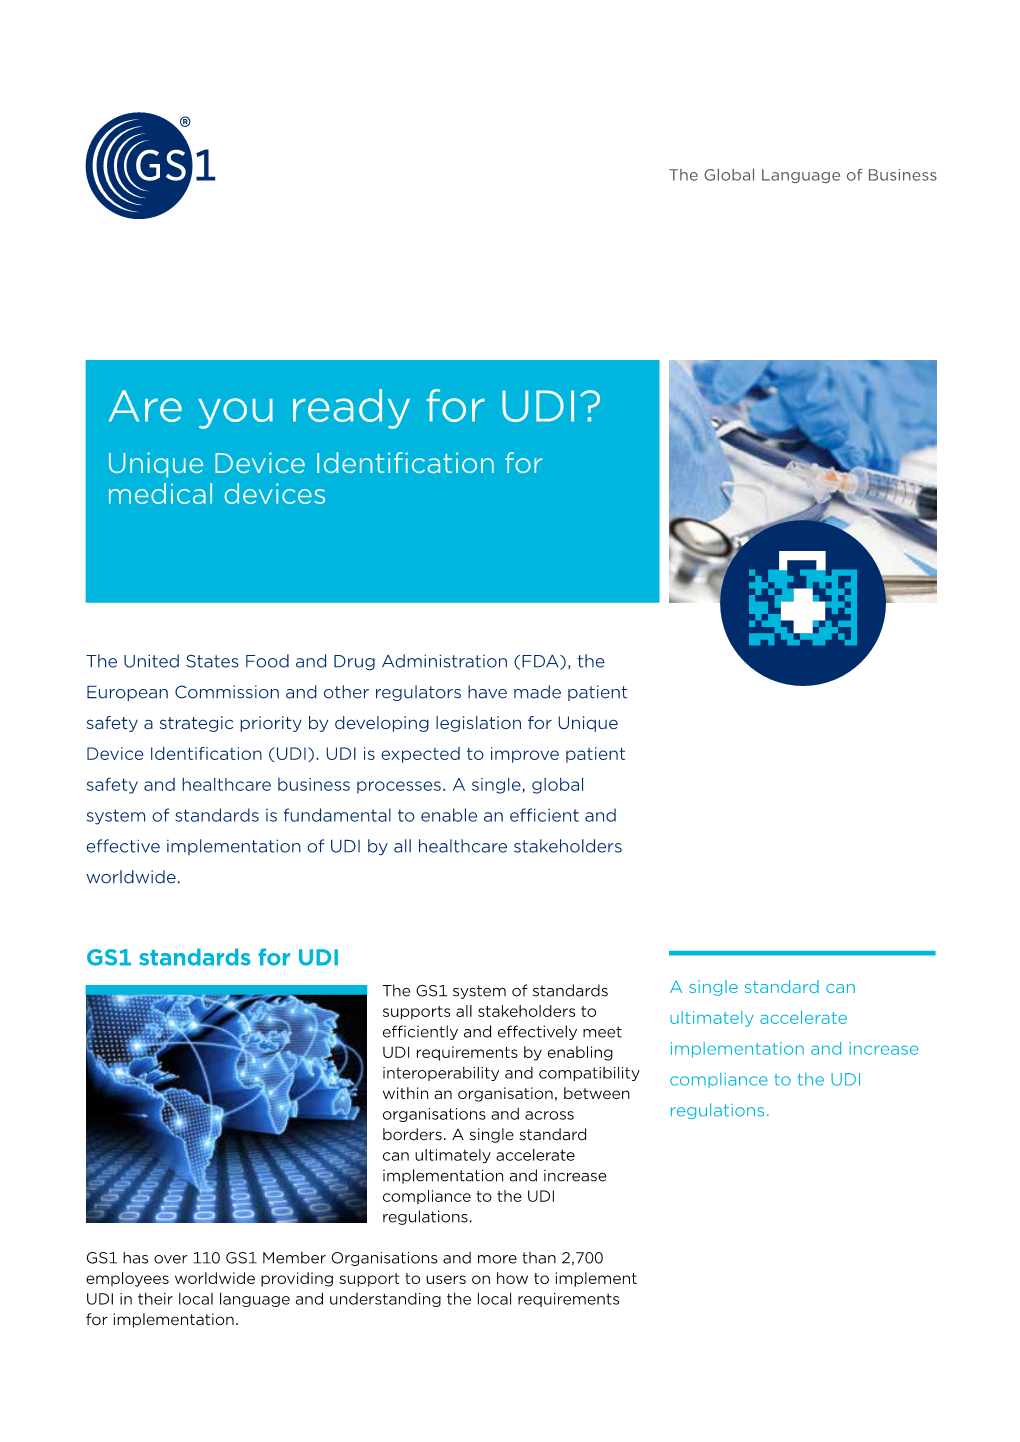 Are You Ready for UDI? Unique Device Identification for Medical Devices